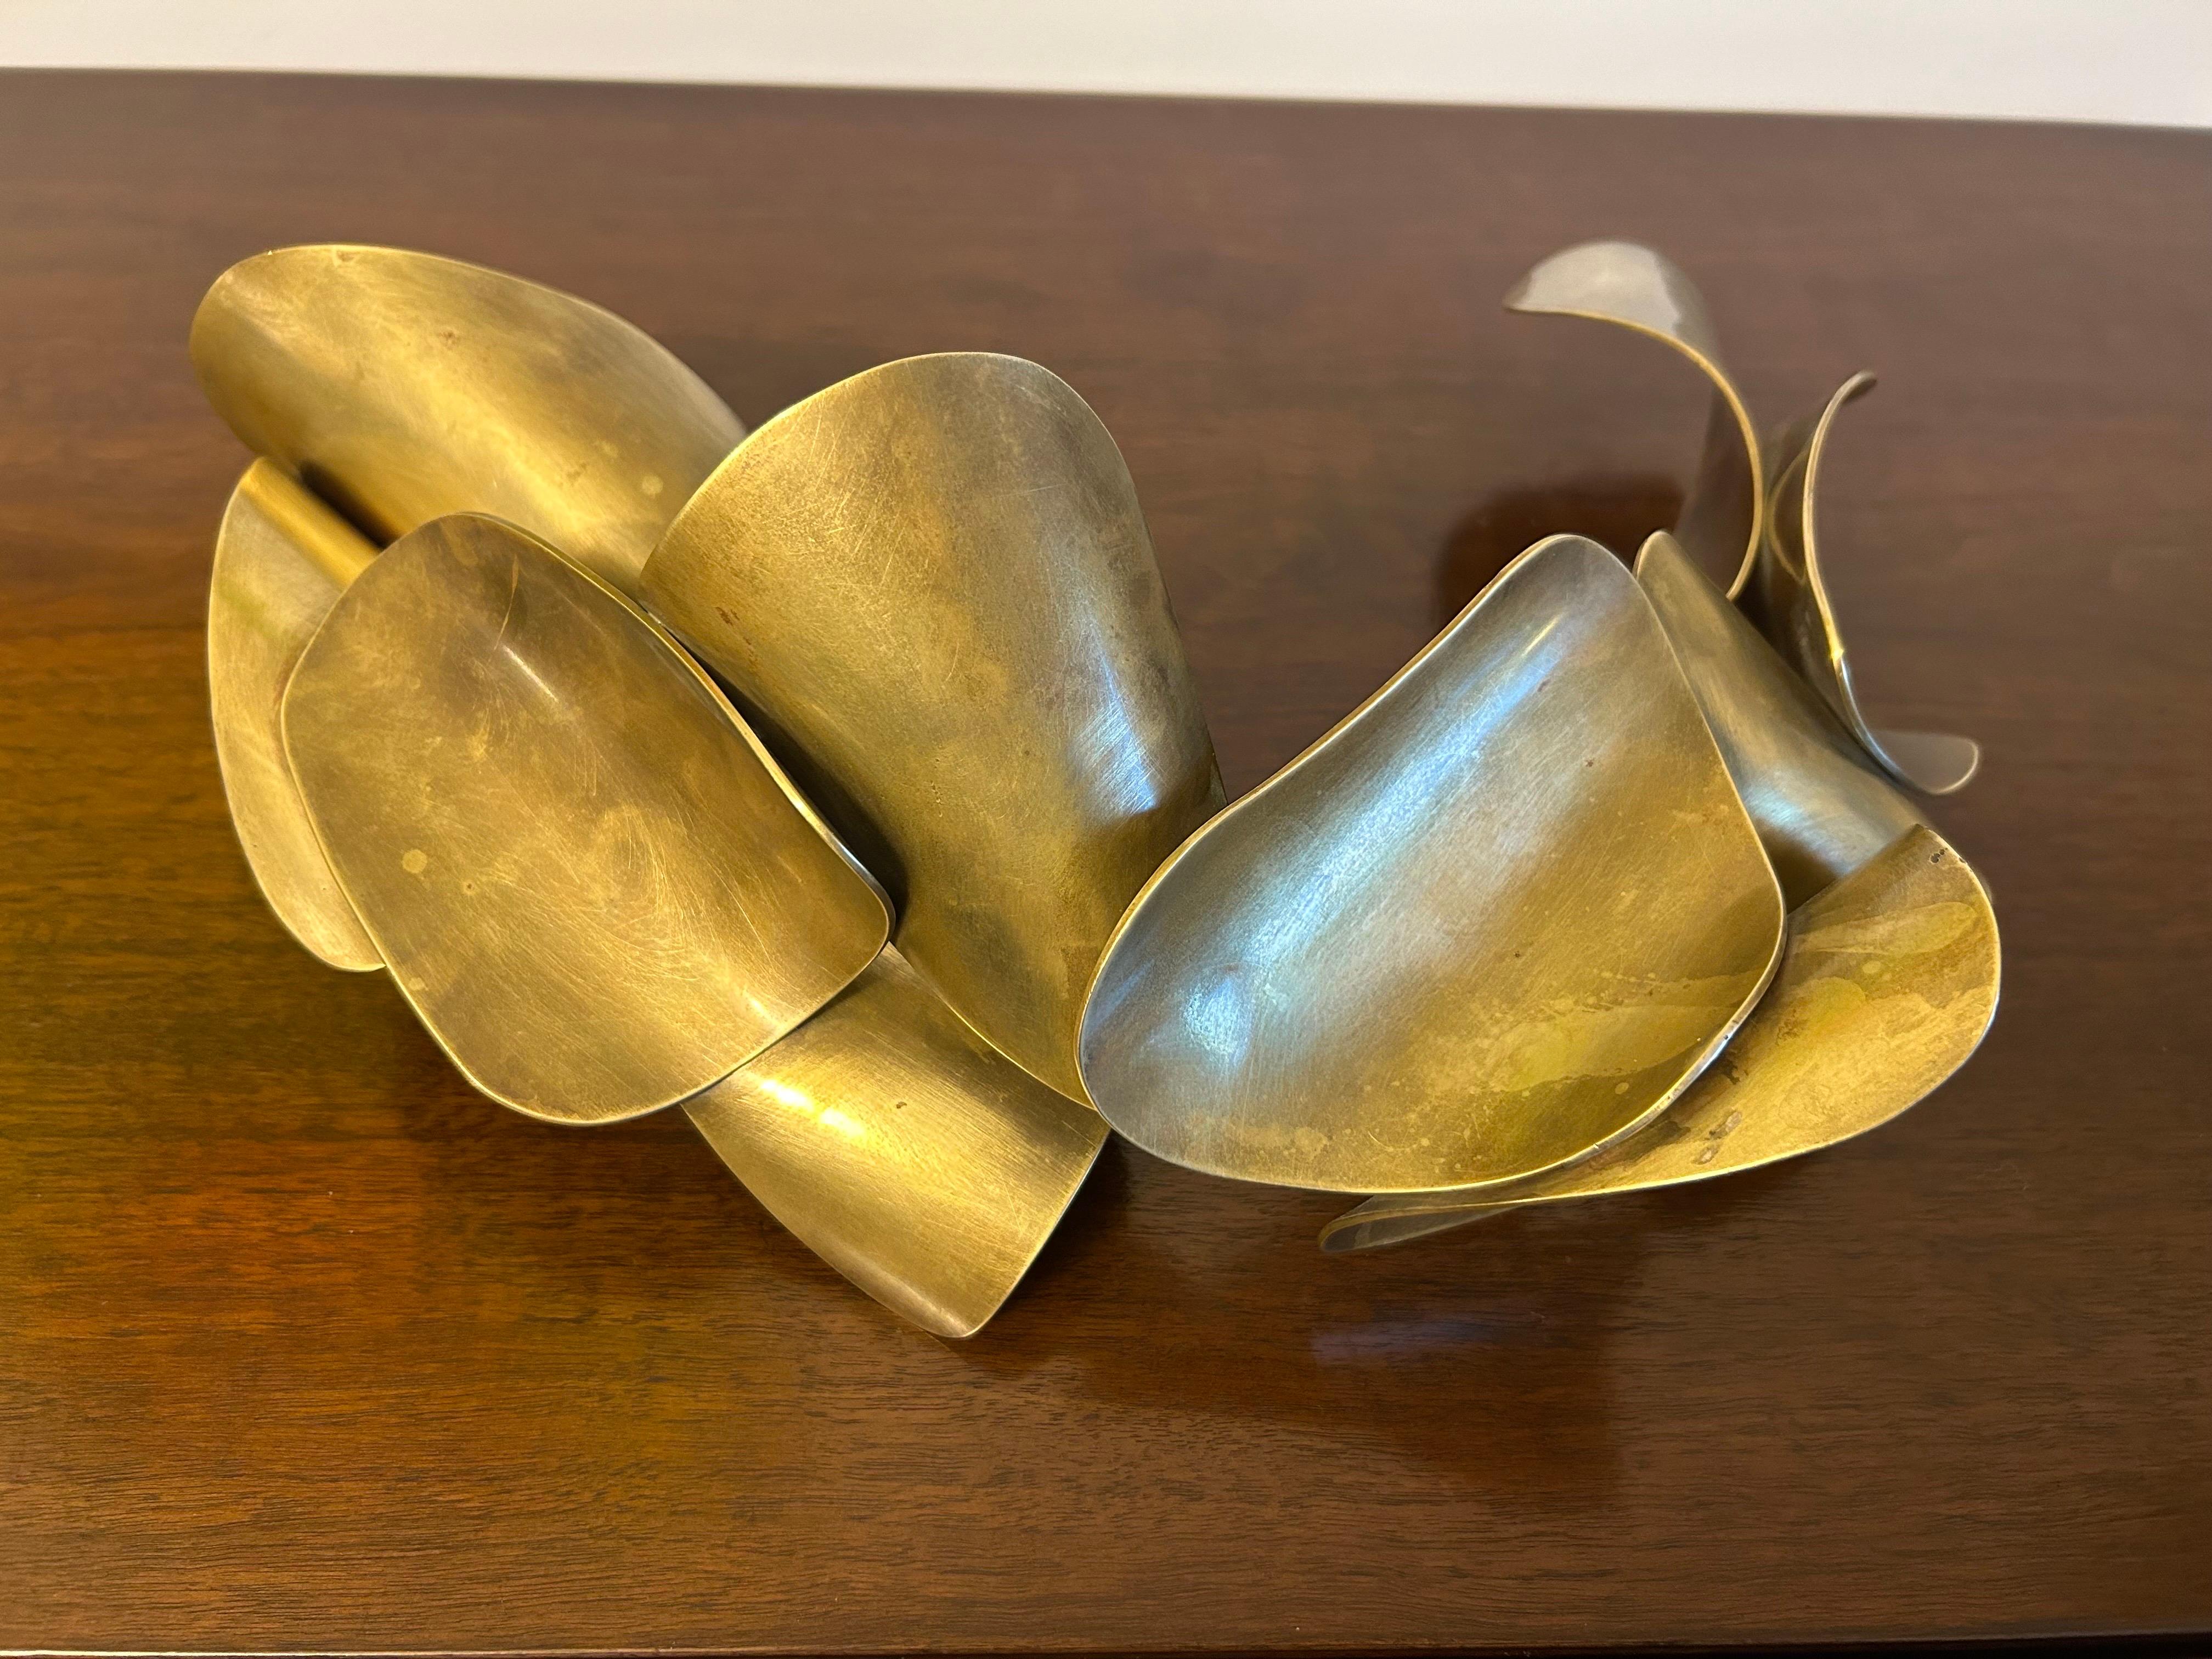 Nice form with undulating thin wedges. 
It does not appear to have a front or back and can be displayed in any way one chooses. 
Great as a decorative art object on a credenza or pedestal.
Nice patina.
No damage. 
Great condition.
Presents